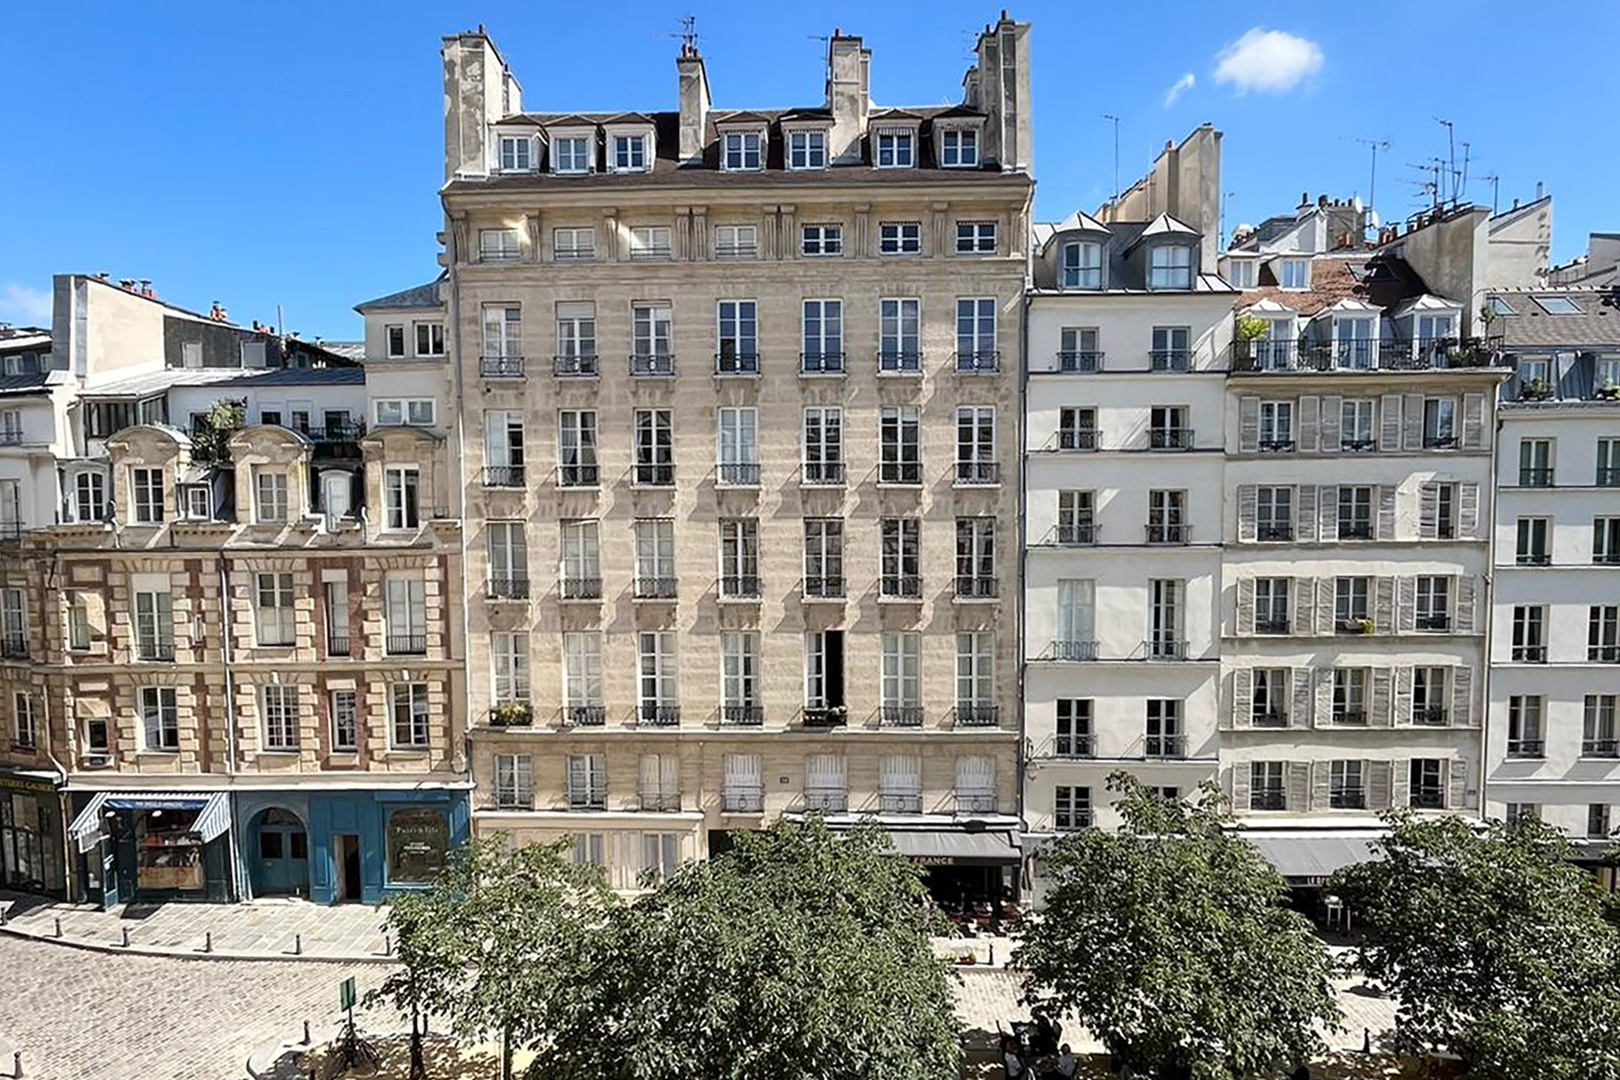 Pétrus is located in a 17th-century building on Place Dauphine.